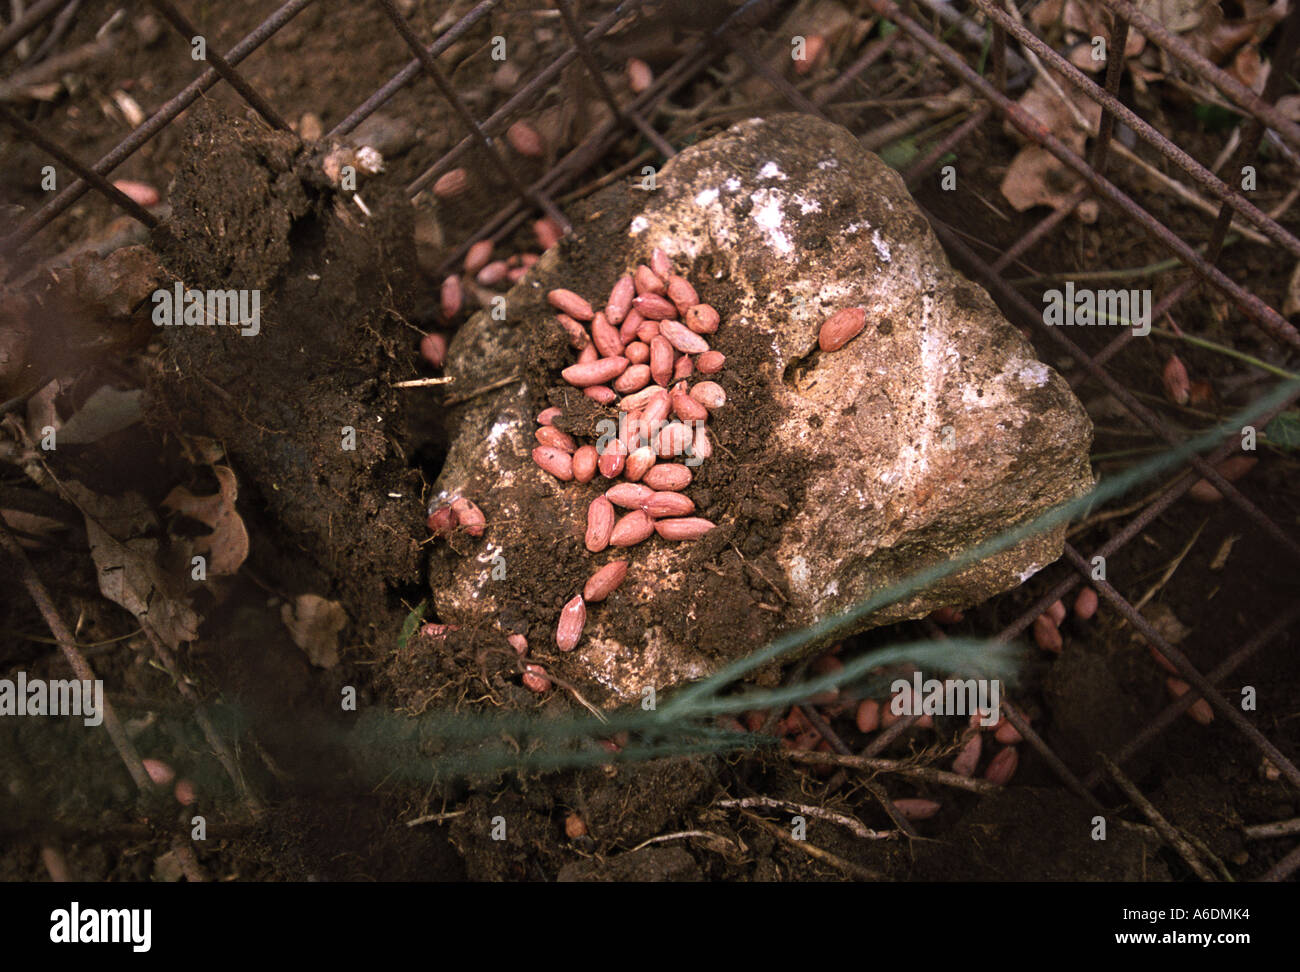 PEANUTS AS BAIT IN A BADGER TRAP SET IN WOODLAND WILTSHIRE UK